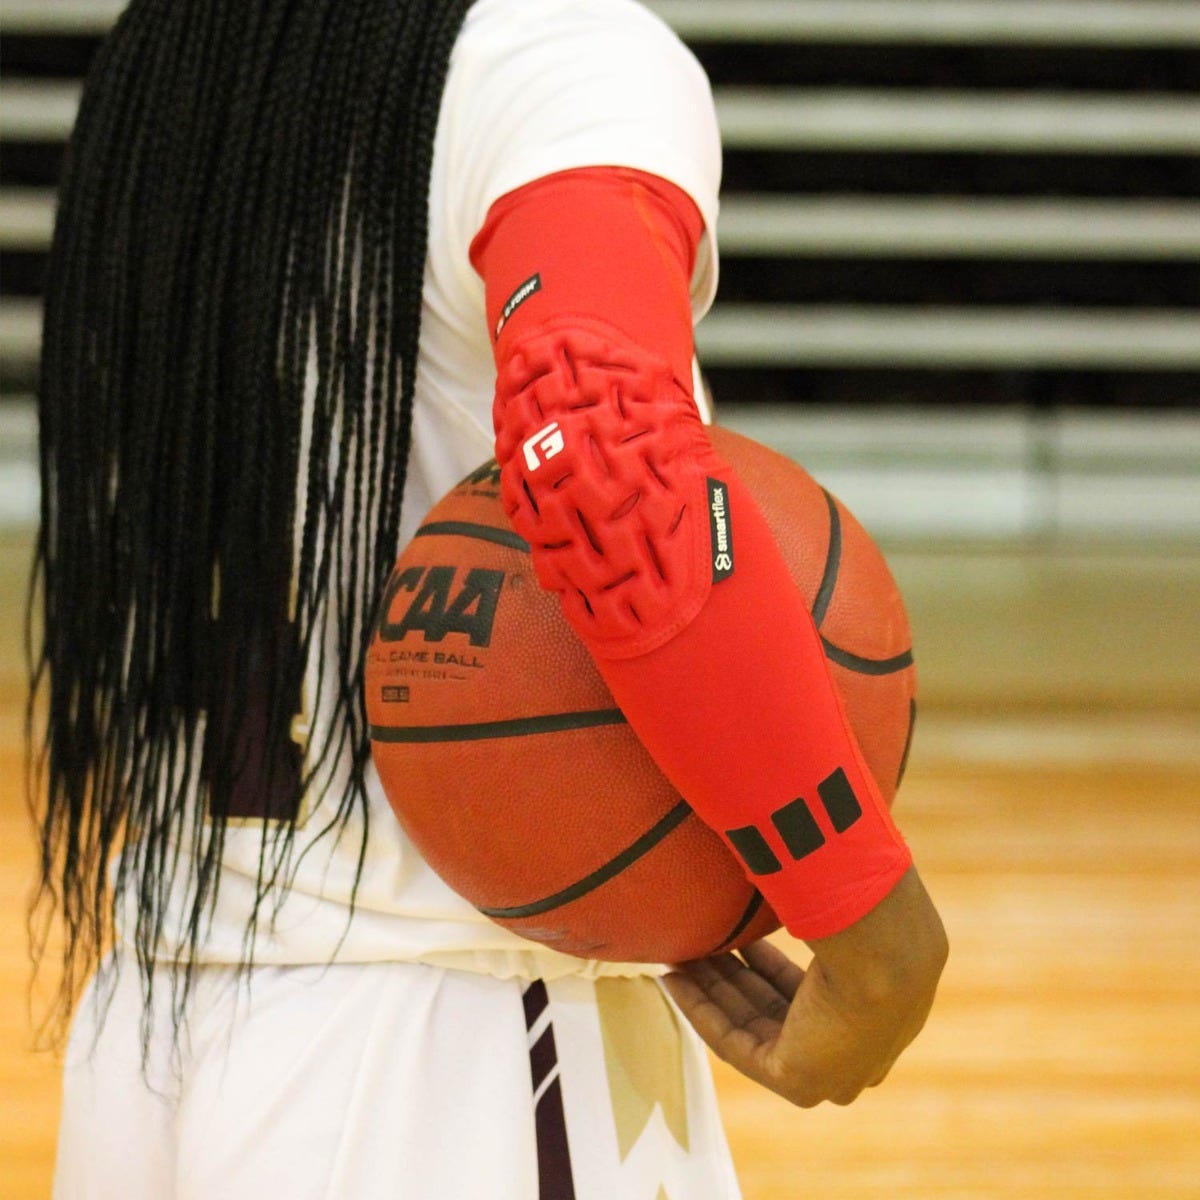 Youth Padded Arm Sleeve for Basketball and Football